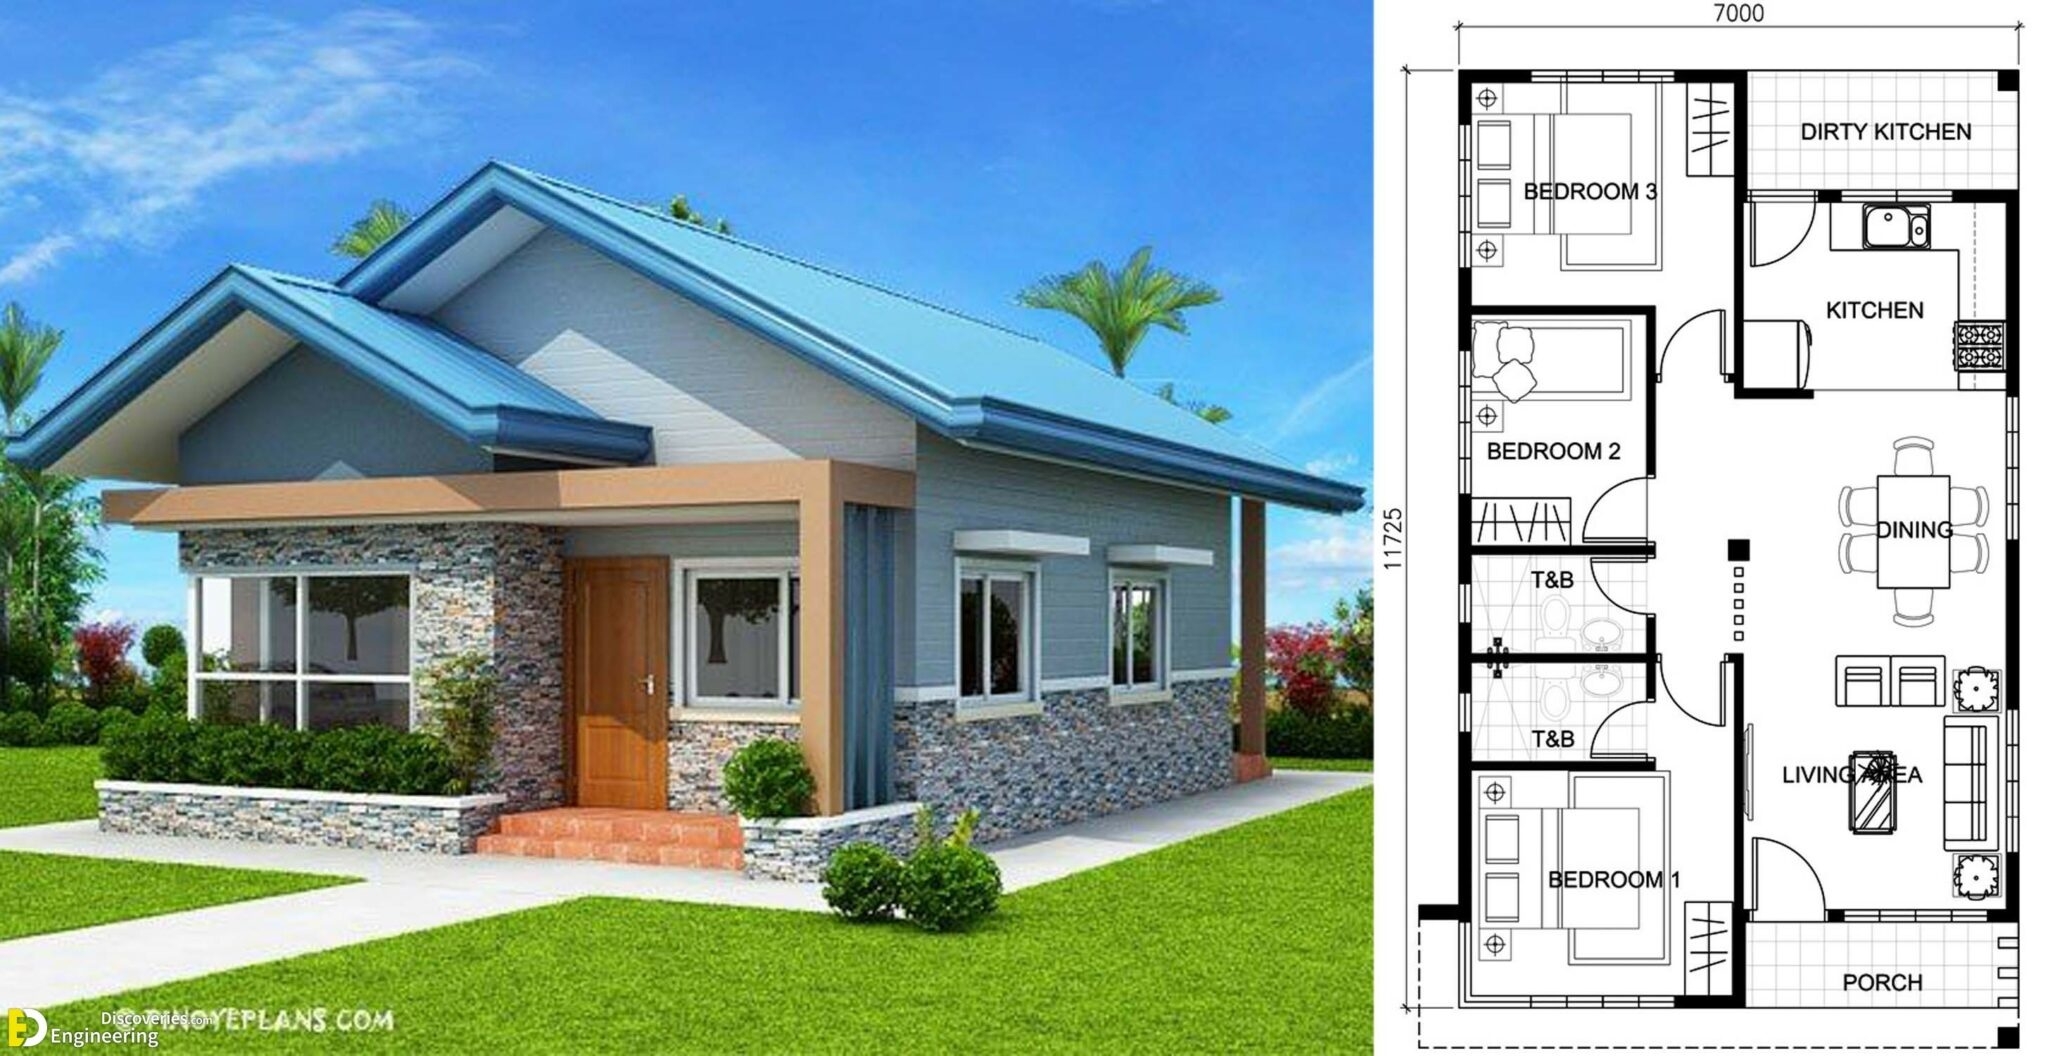 Cool three bedroom bungalow house plans engineering discoveries within simple 3bedroom house